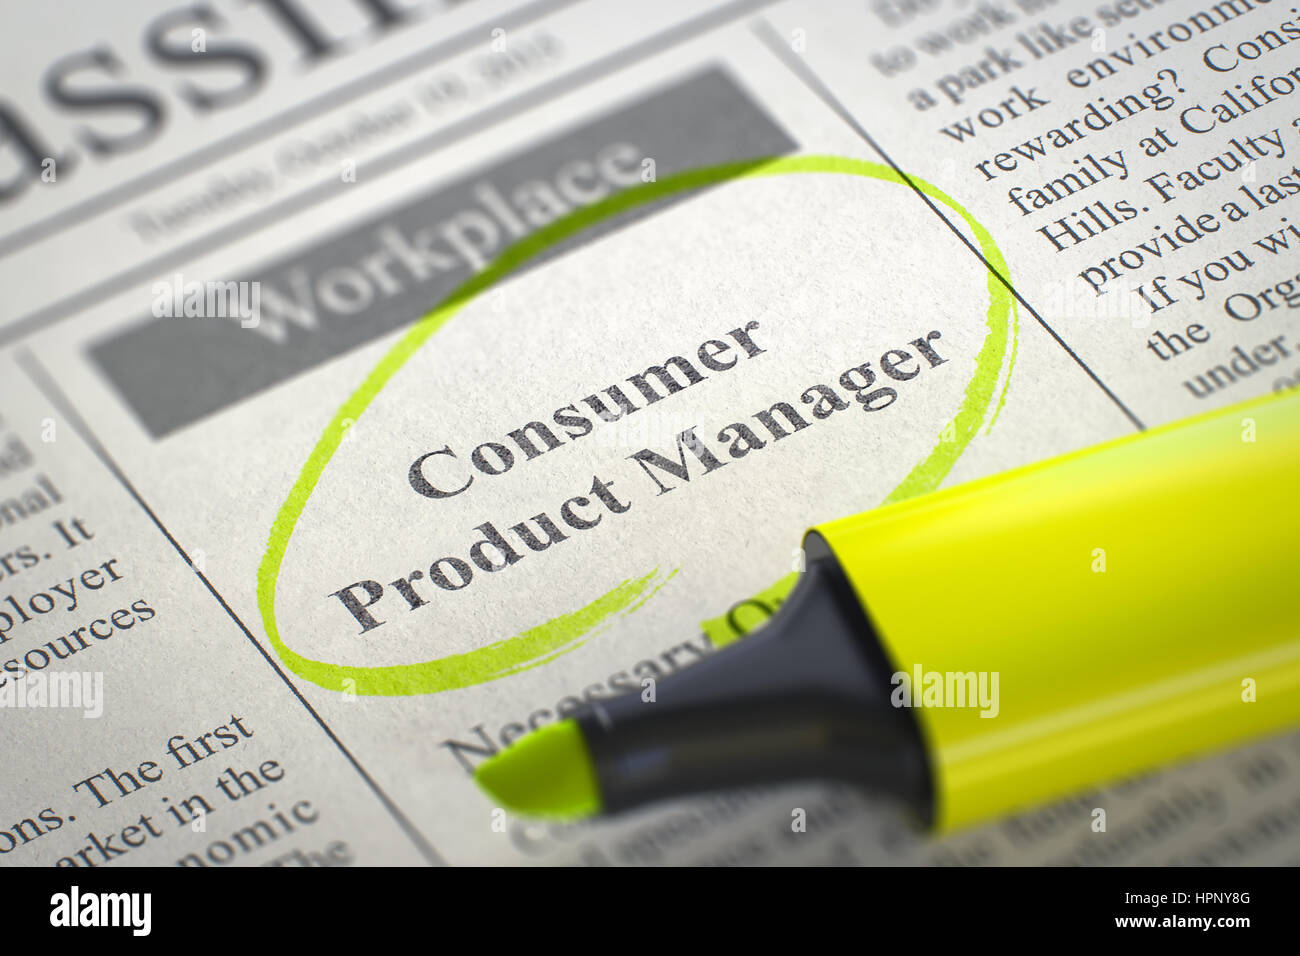 Job Opening Consumer Product Manager. 3D. Stockfoto